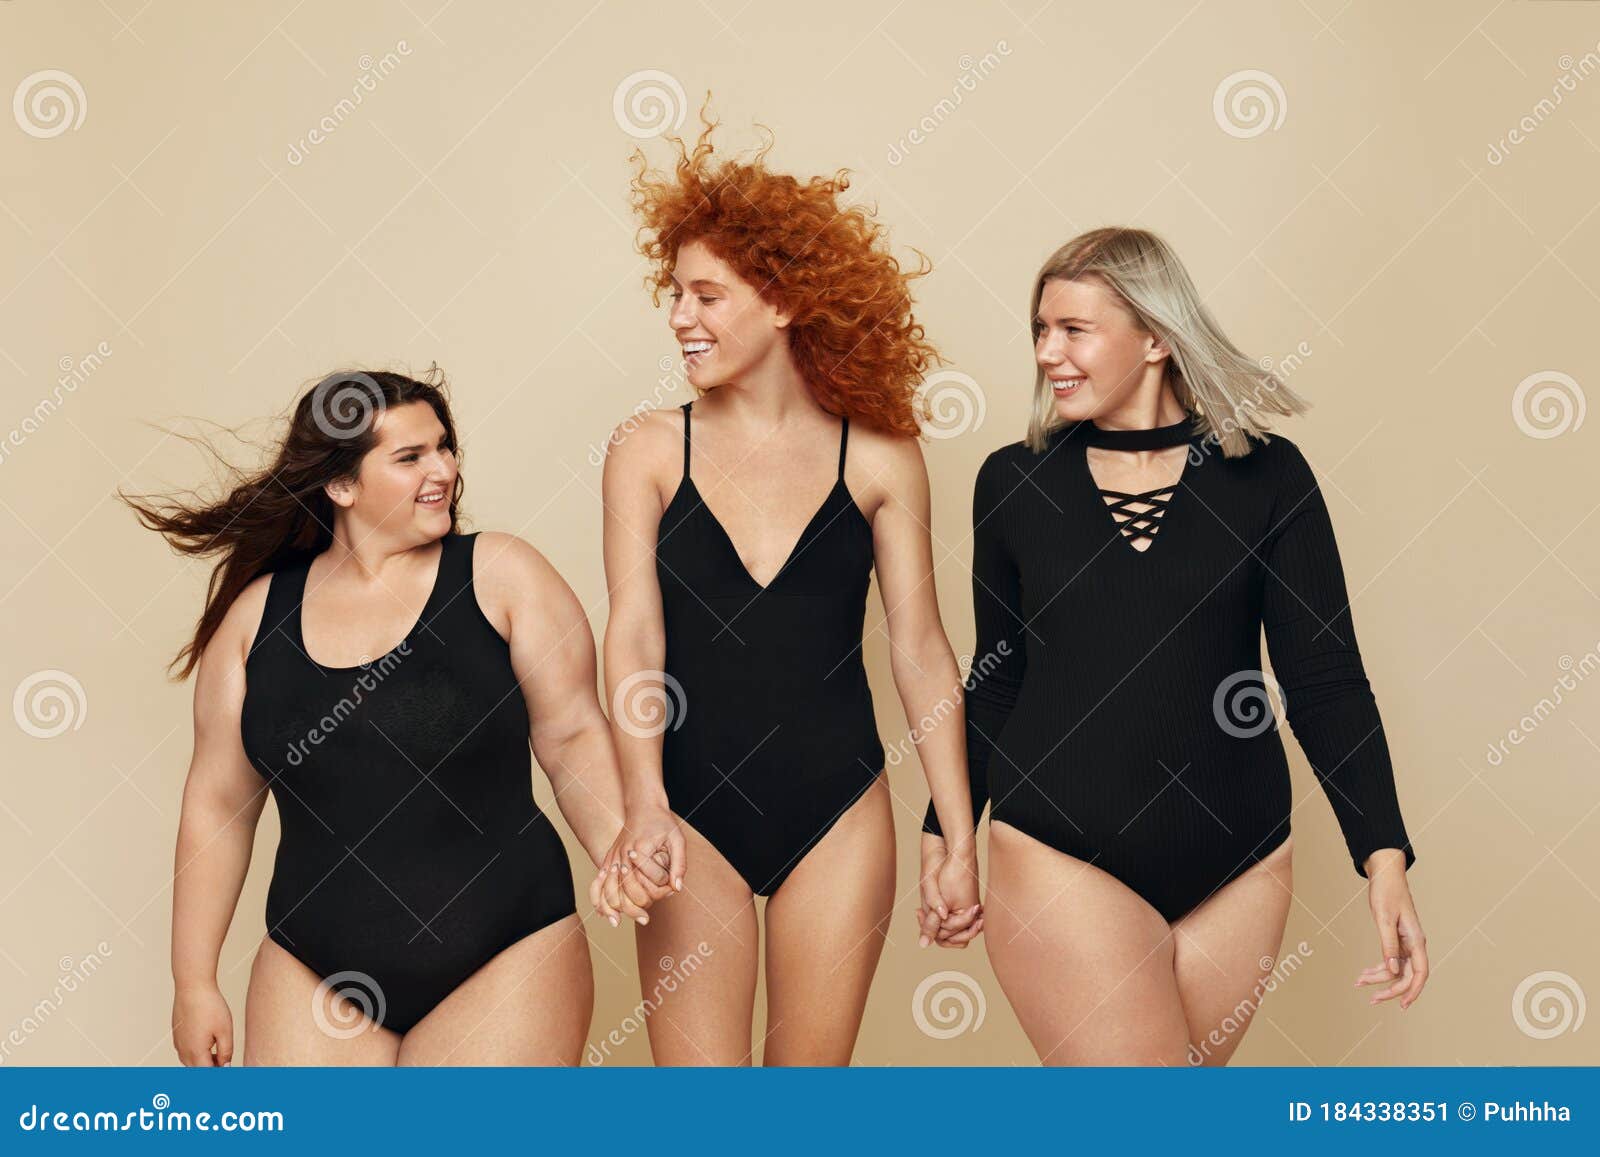 different body types. group of diversity models portrait. cheerful blonde, brunette and redhead in black bodysuits holding hands.